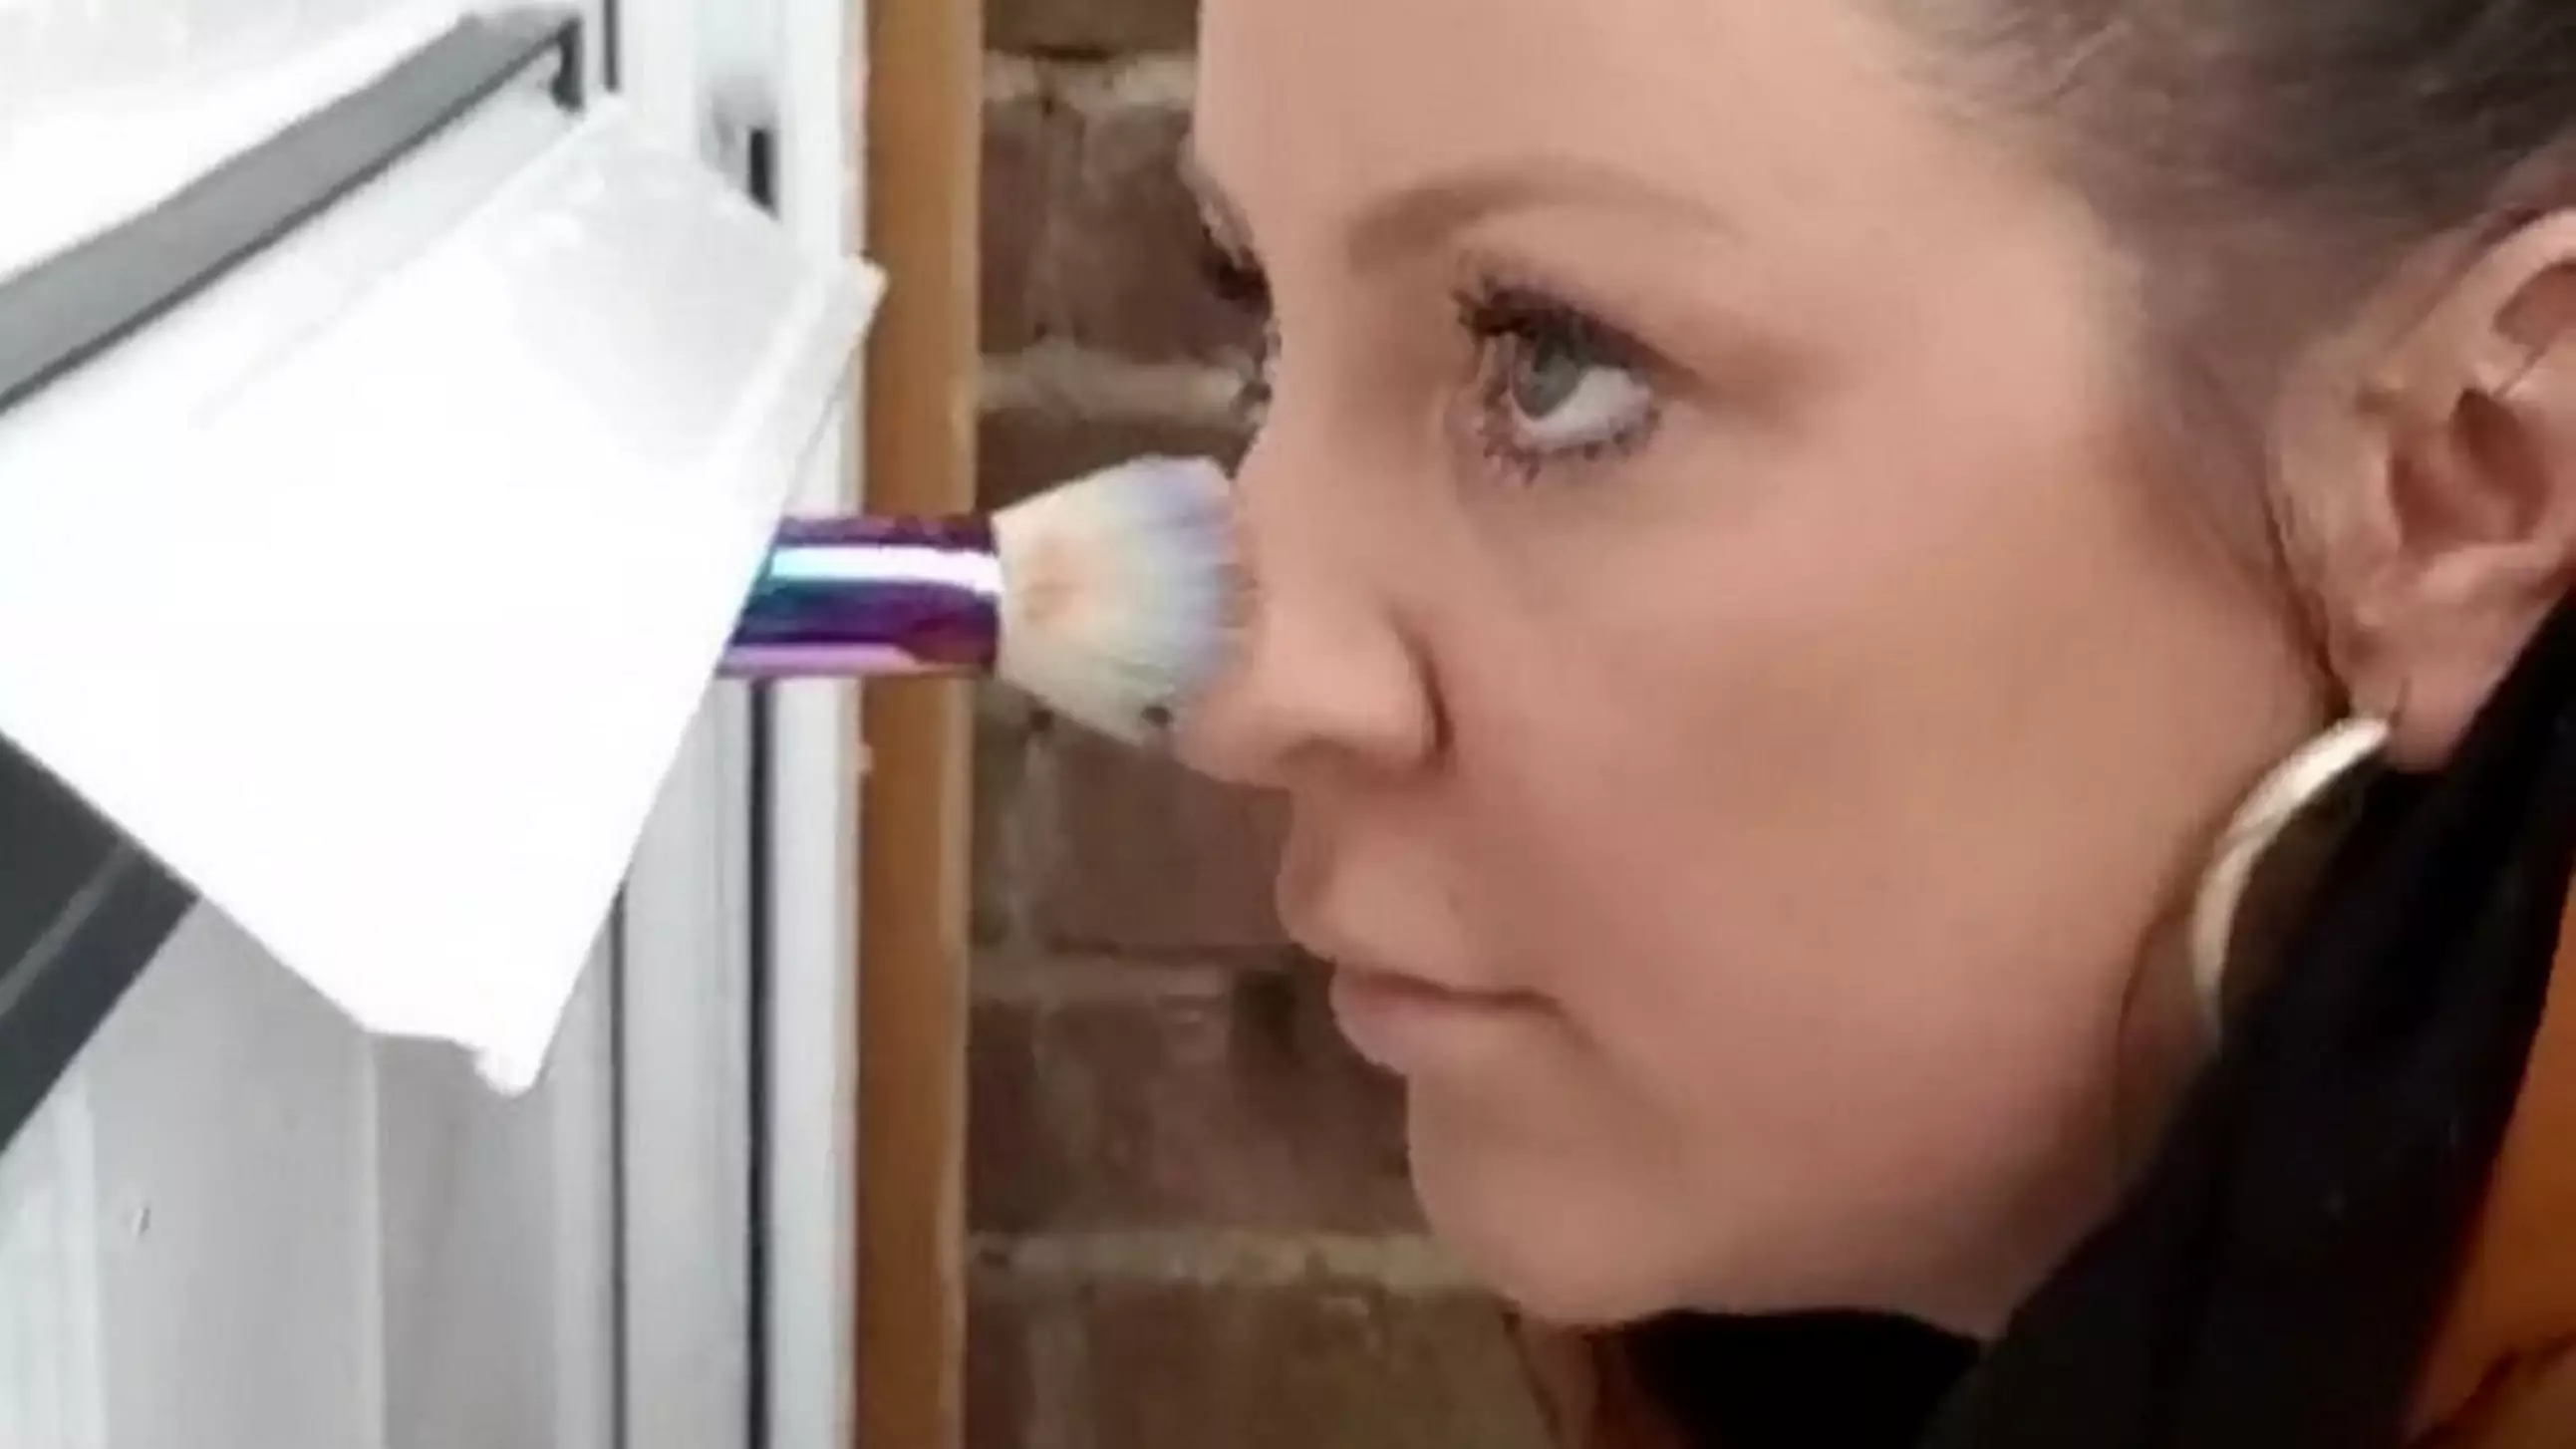 Make-Up Artist Carries Out A Job Through The Letterbox To Avoid Touching Her Client